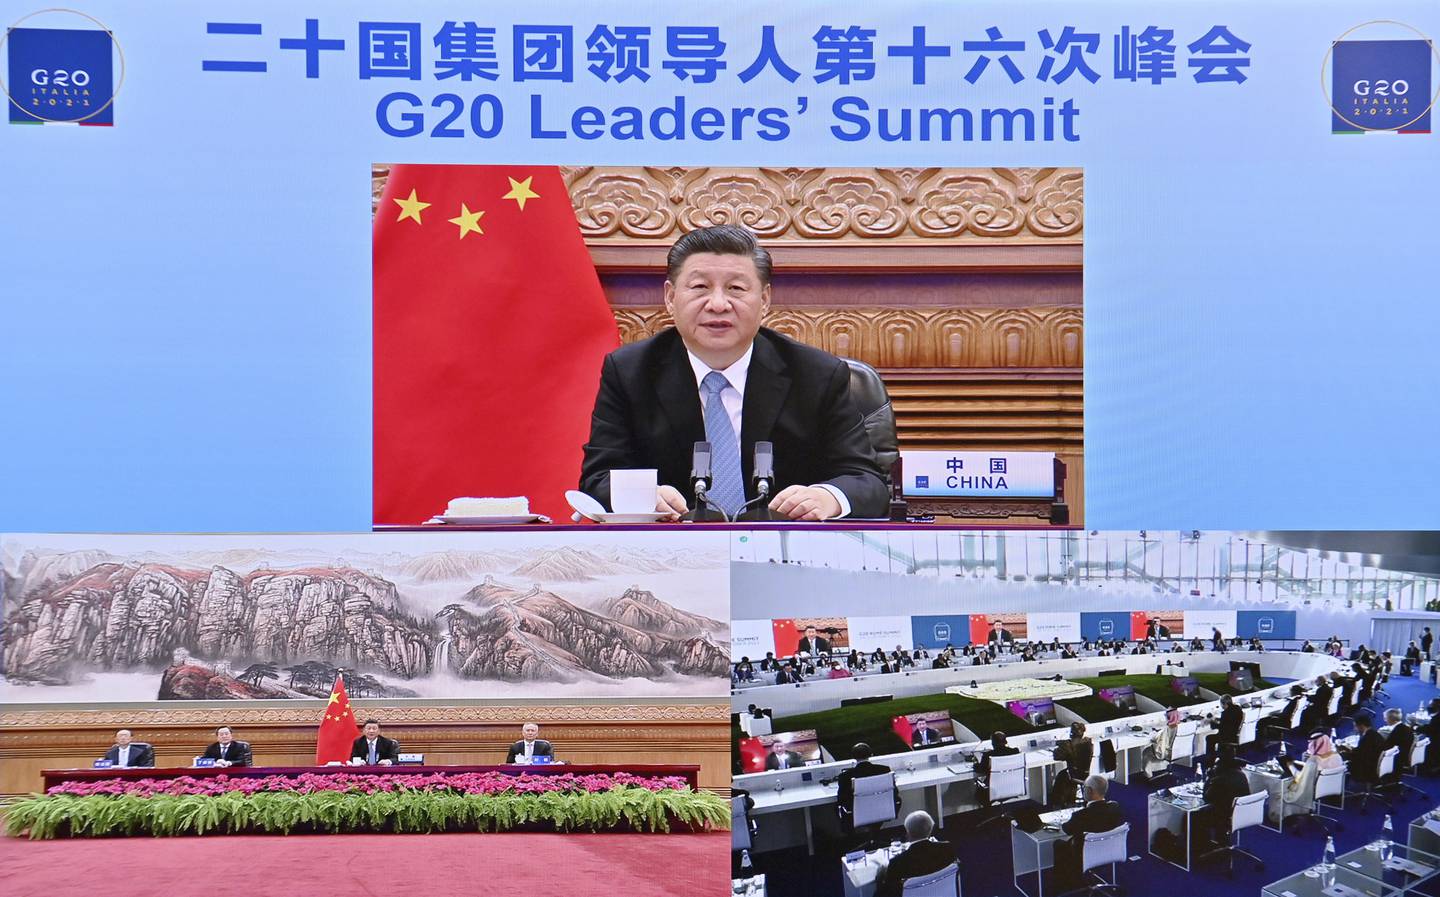 In this photo released by China's Xinhua News Agency, Chinese President Xi Jinping speaks via video link to leaders at the G20 Summit from Beijing.  AP